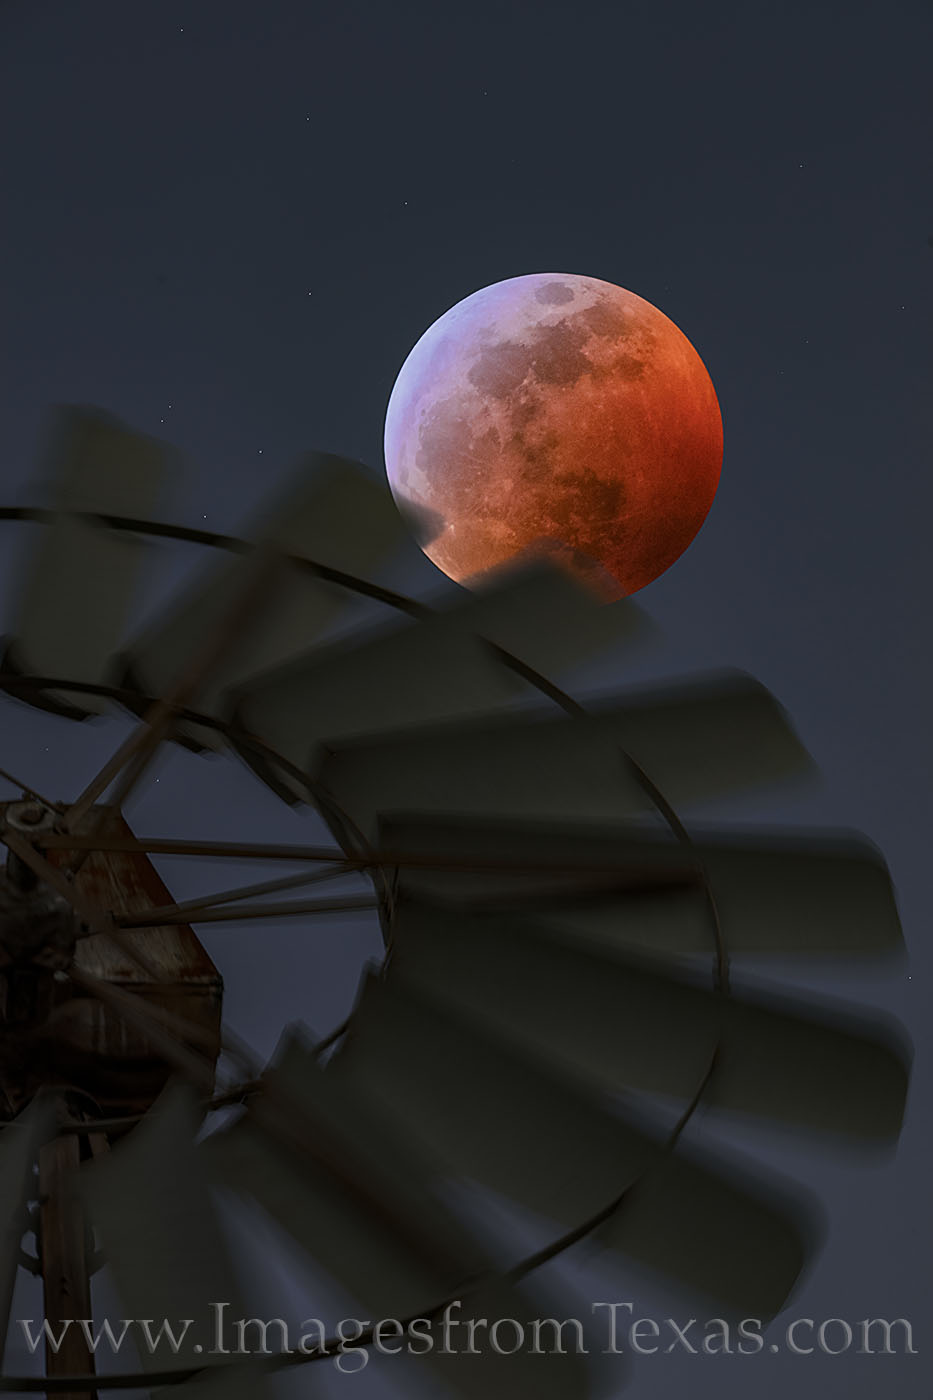 This blood moon image was taken at the peak of the eclipse. I used a windmill’s blades as the foreground – shot while basically...